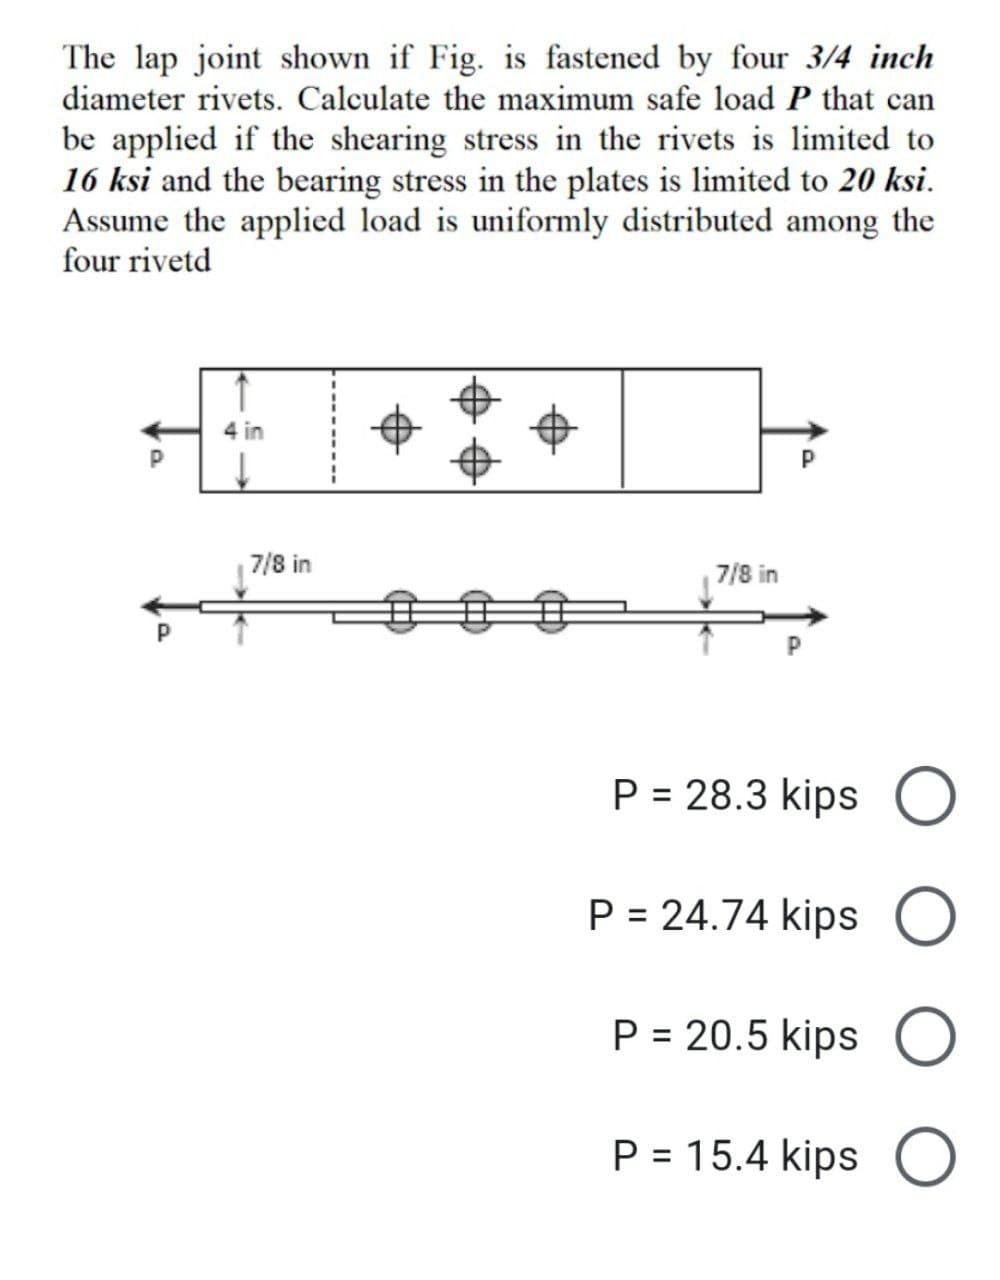 The lap joint shown if Fig. is fastened by four 3/4 inch
diameter rivets. Calculate the maximum safe load P that can
be applied if the shearing stress in the rivets is limited to
16 ksi and the bearing stress in the plates is limited to 20 ksi.
Assume the applied load is uniformly distributed among the
four rivetd
4 in
7/8 in
P = 28.3 kips O
P = 24.74 kips O
P = 20.5 kips O
P = 15.4 kips
O
a
7/8 in